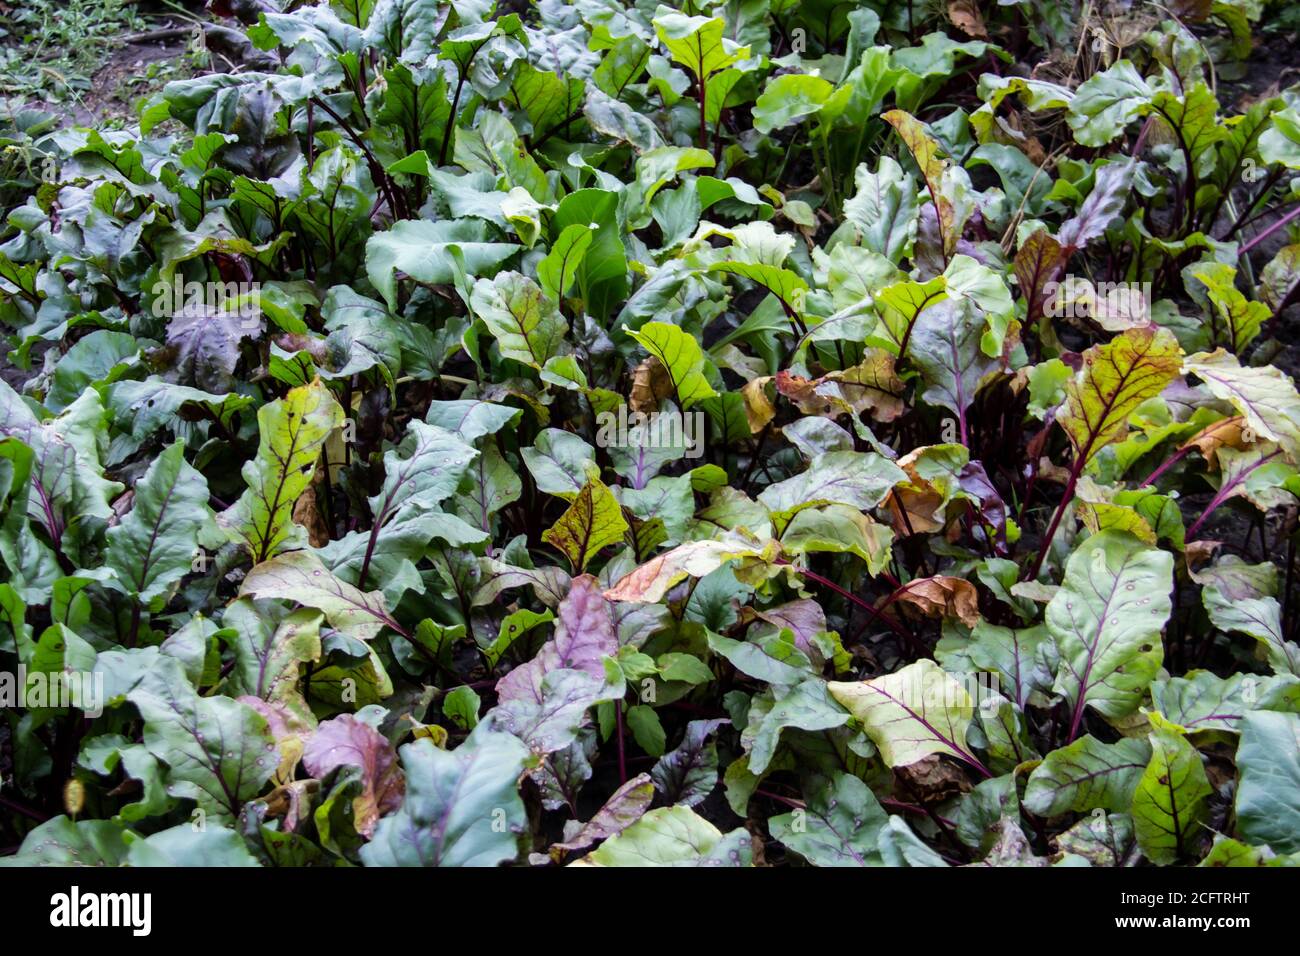 Young beet grows in the beds in the garden. Farm homestead with agricultural landings and growing organic vegetables. Fresh green beet leaves or beet Stock Photo